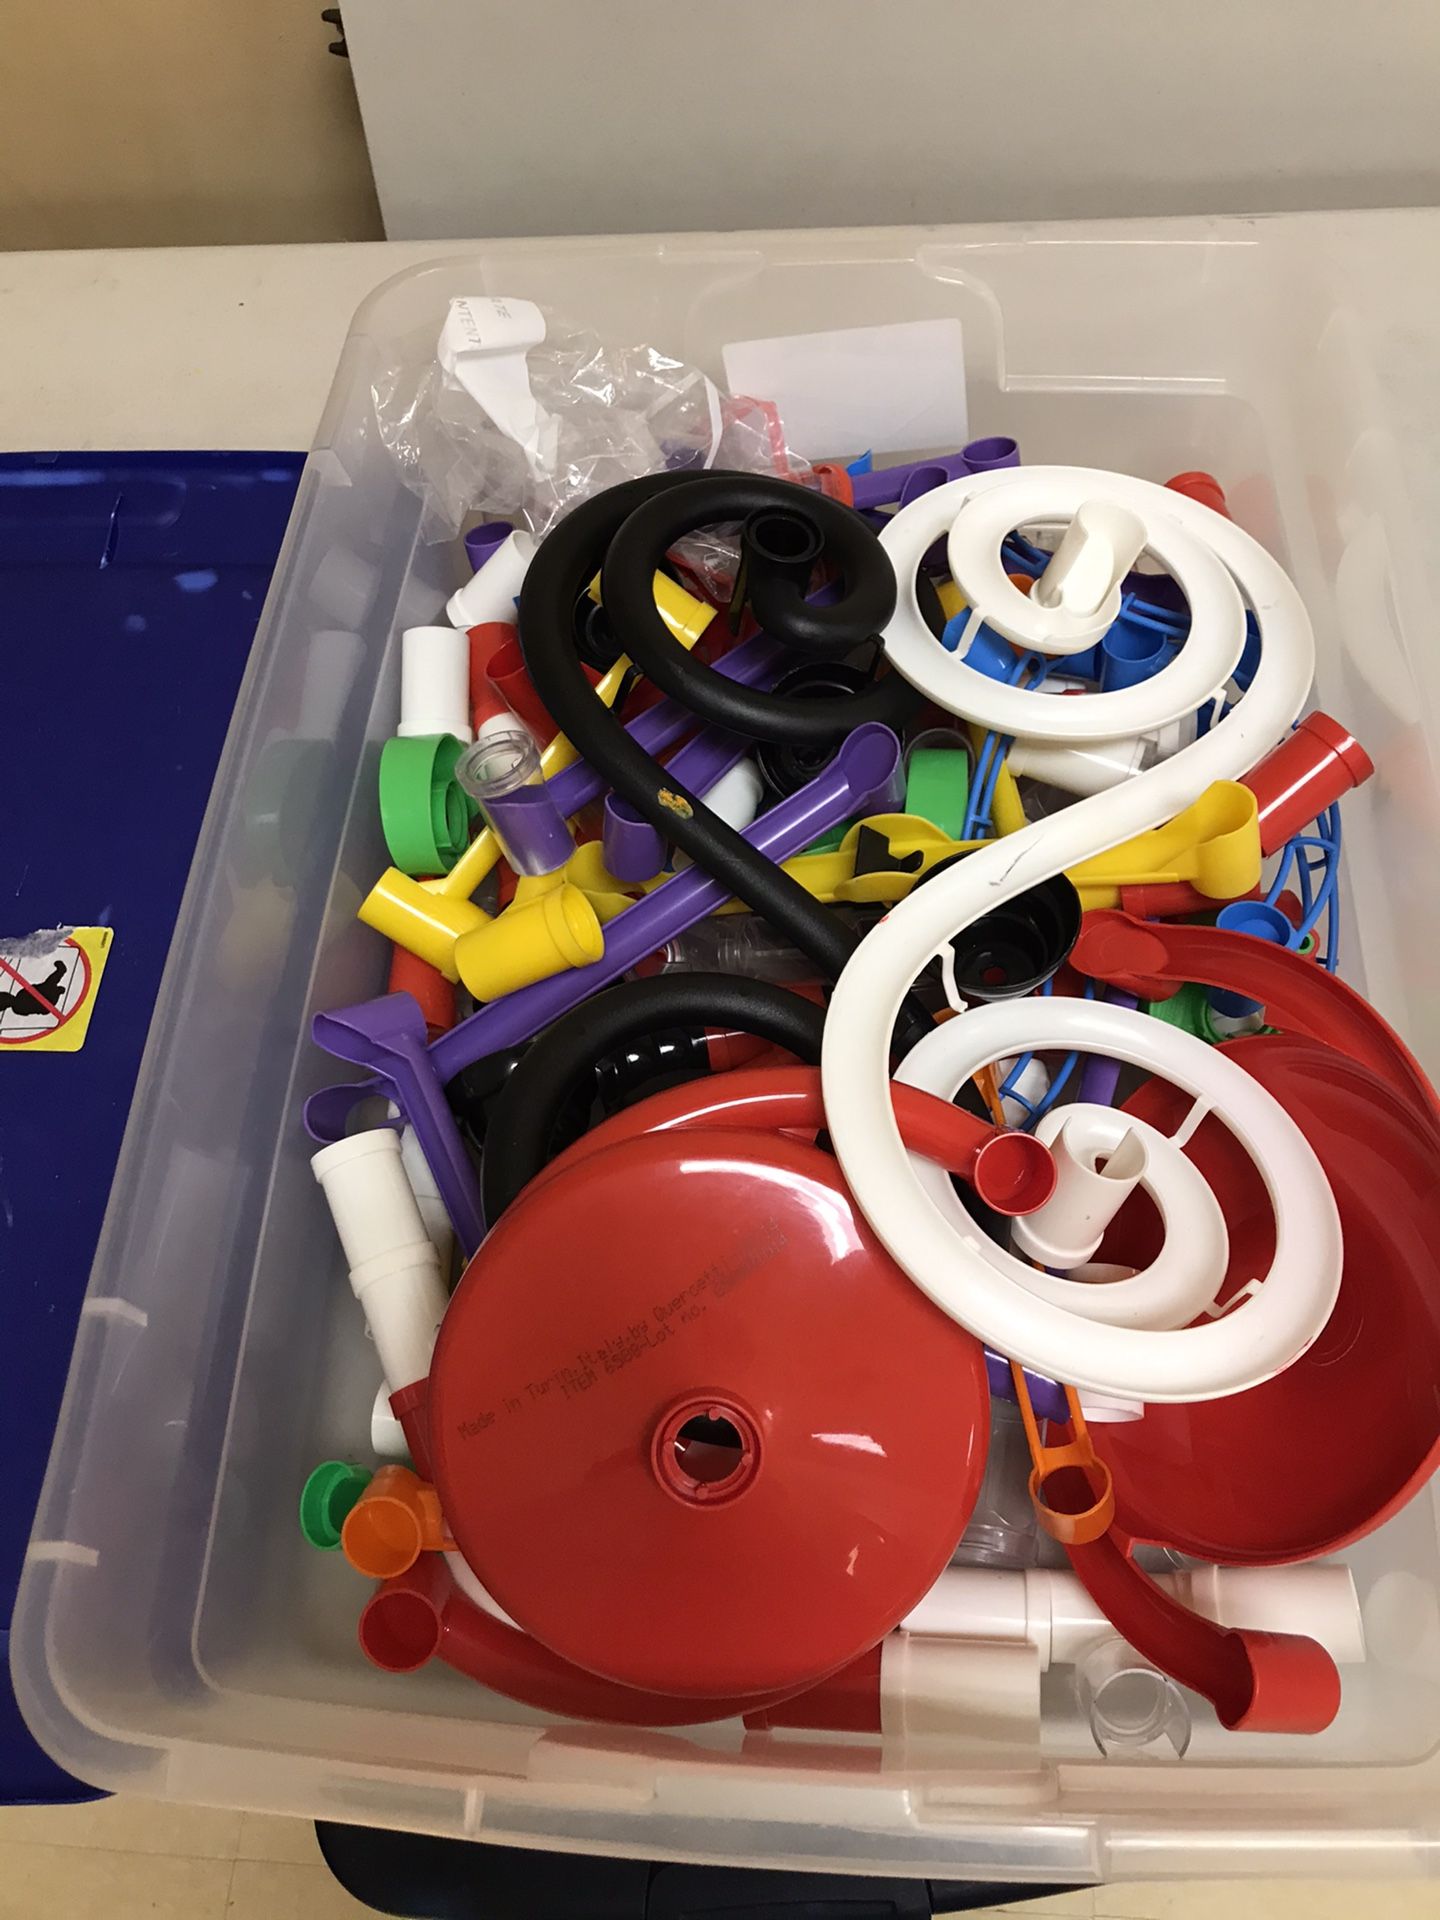 Kids STEAM also included. Weights, marble run, etc